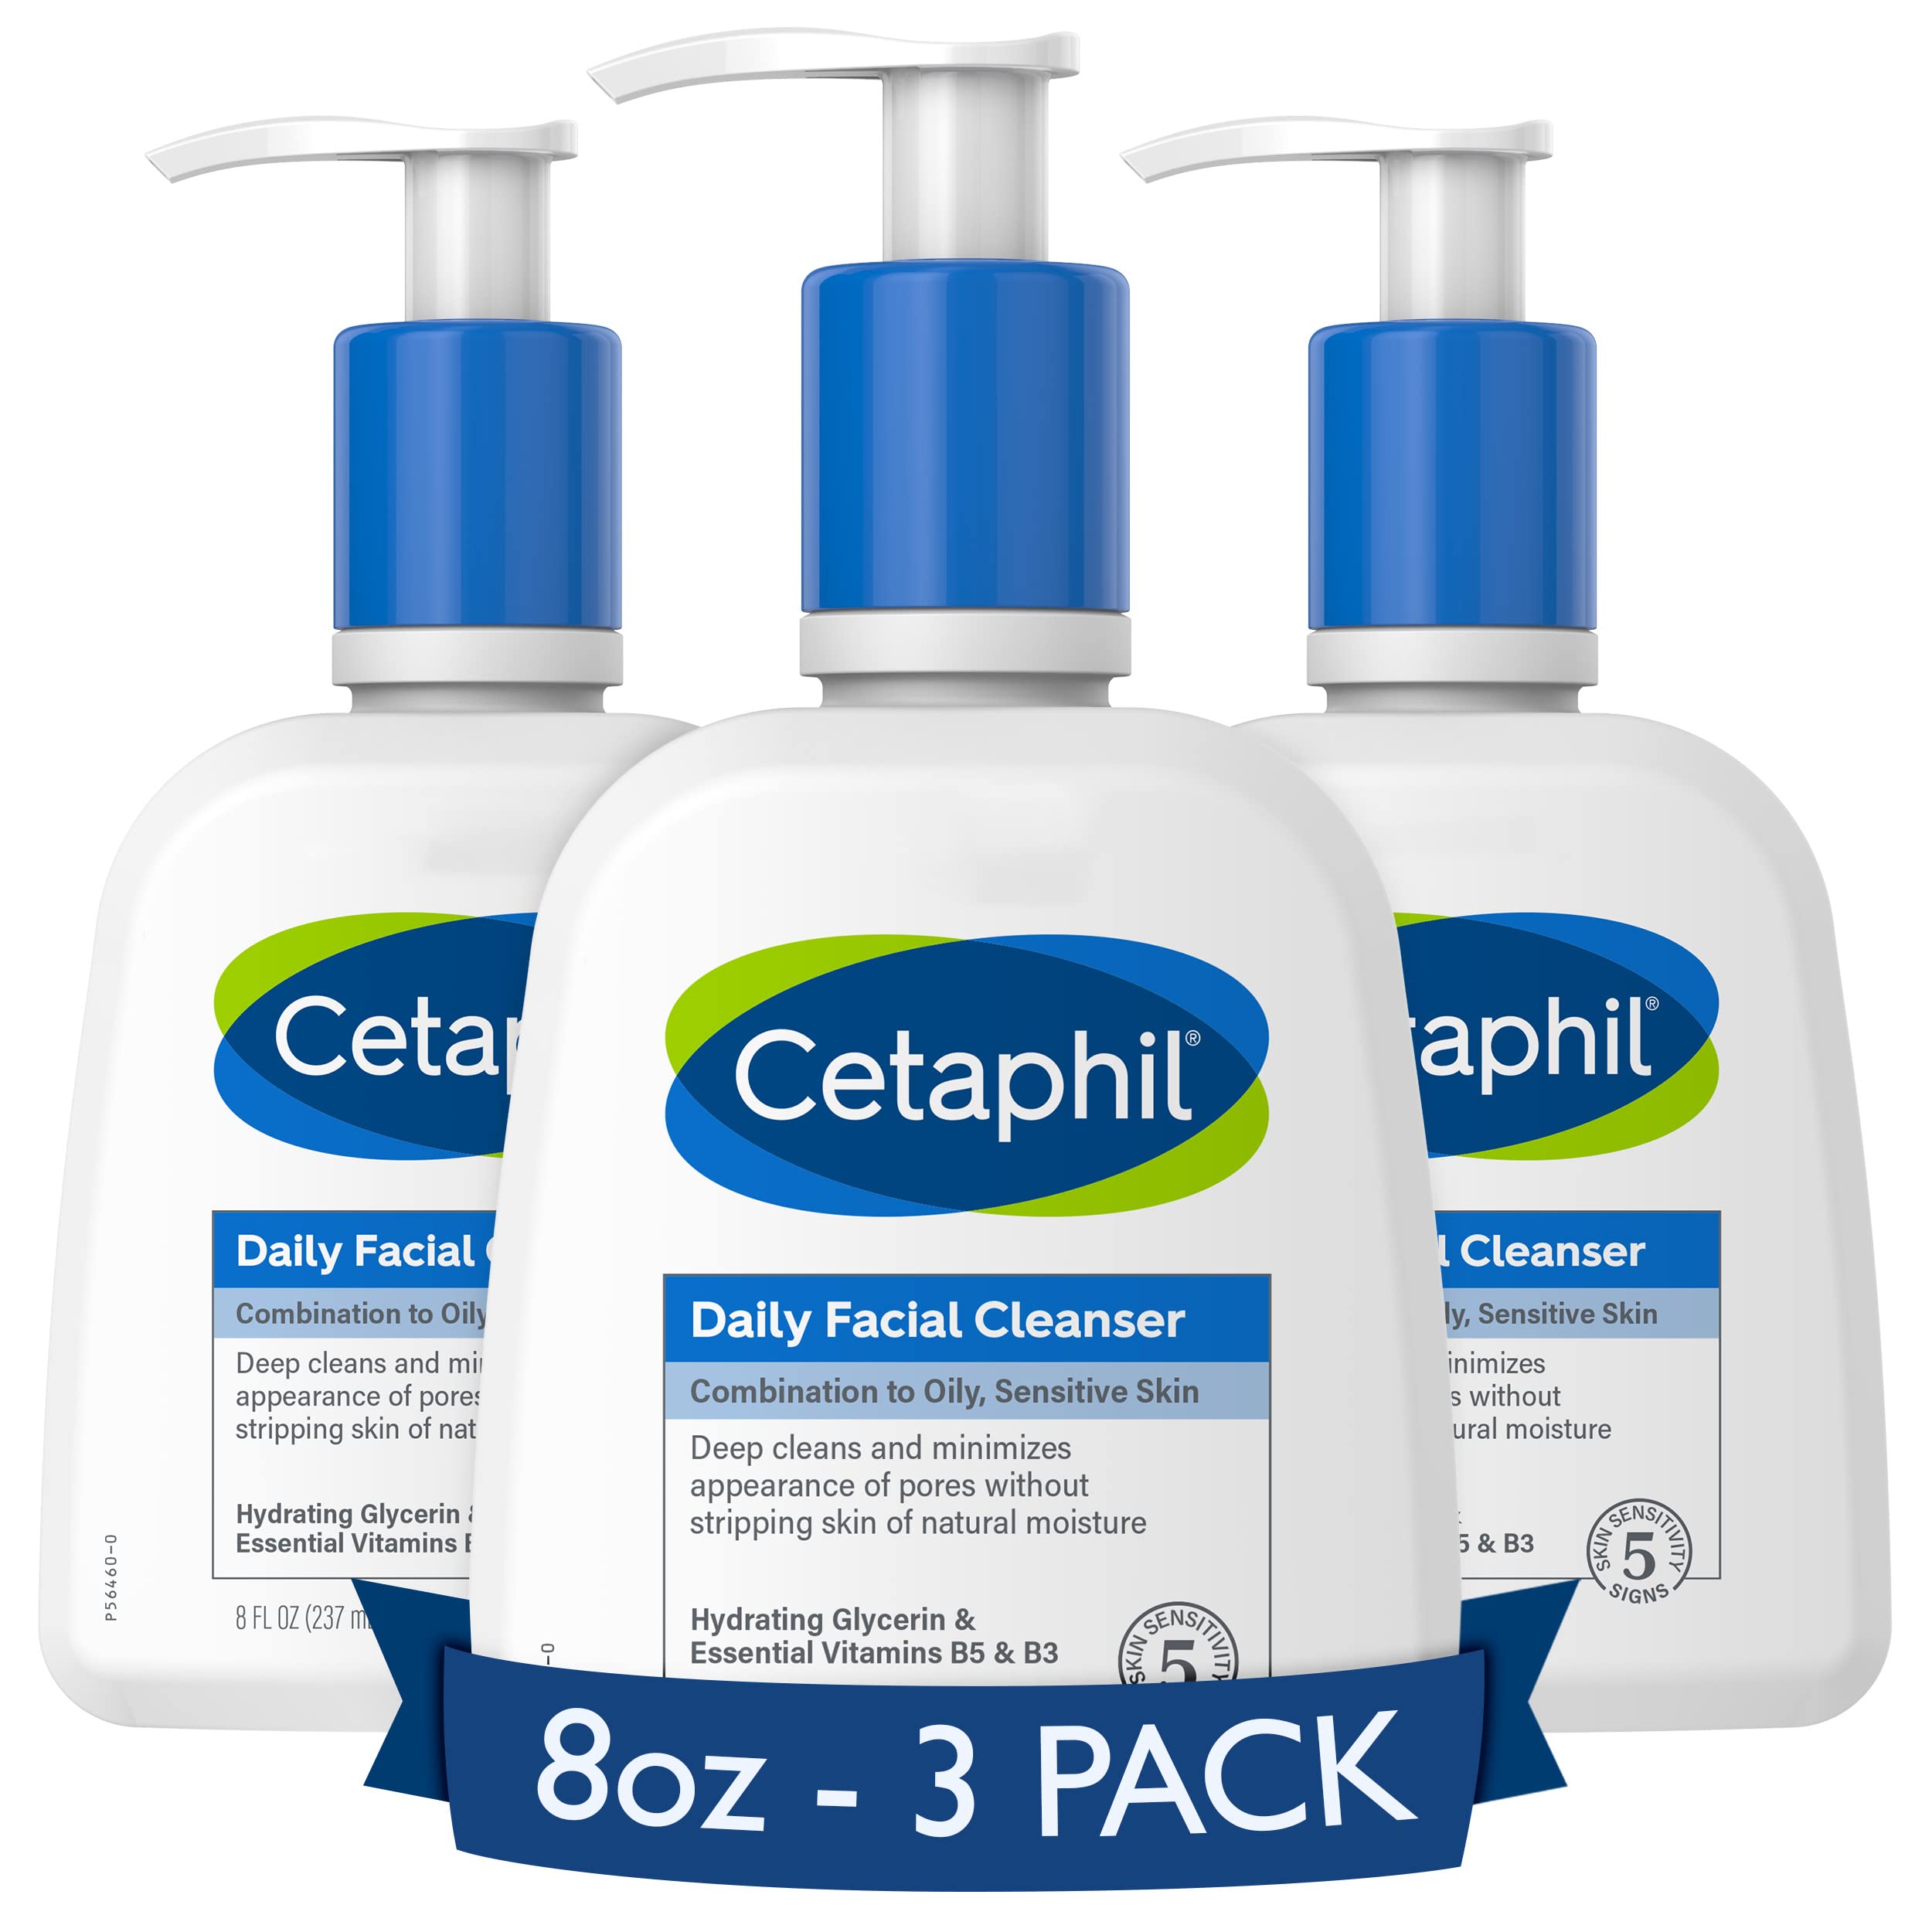 3-Pack 8oz Cetaphil Daily Facial Cleanser (Combination to Oily, Sensitive Skin) $14.67 w/ Subscribe & Save